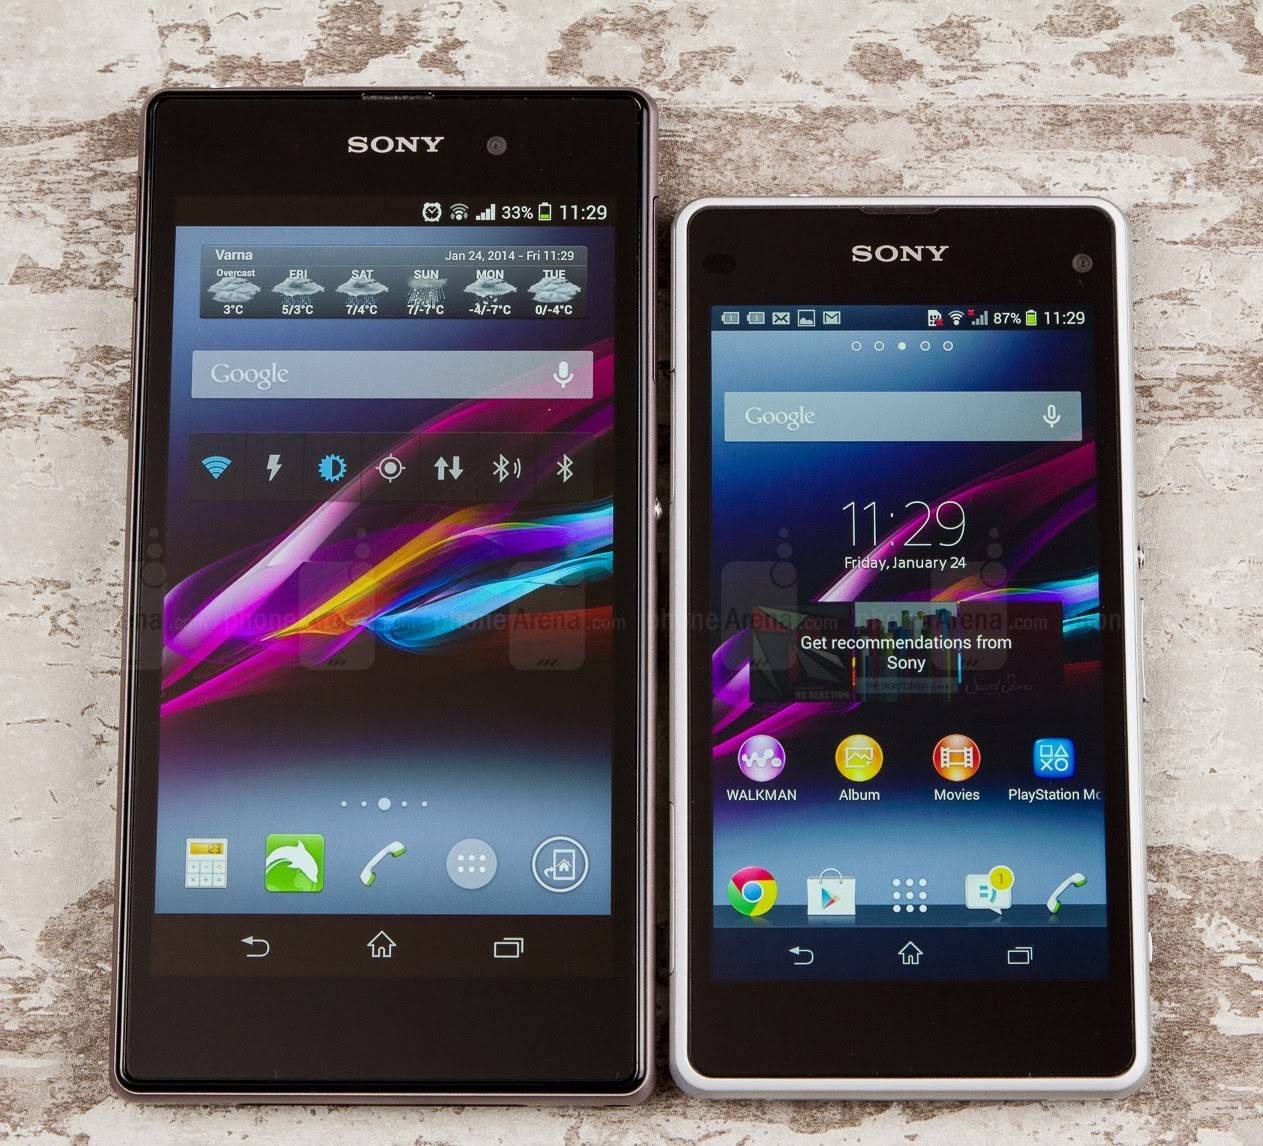 Sony xperia z1 compact — мал, да удал